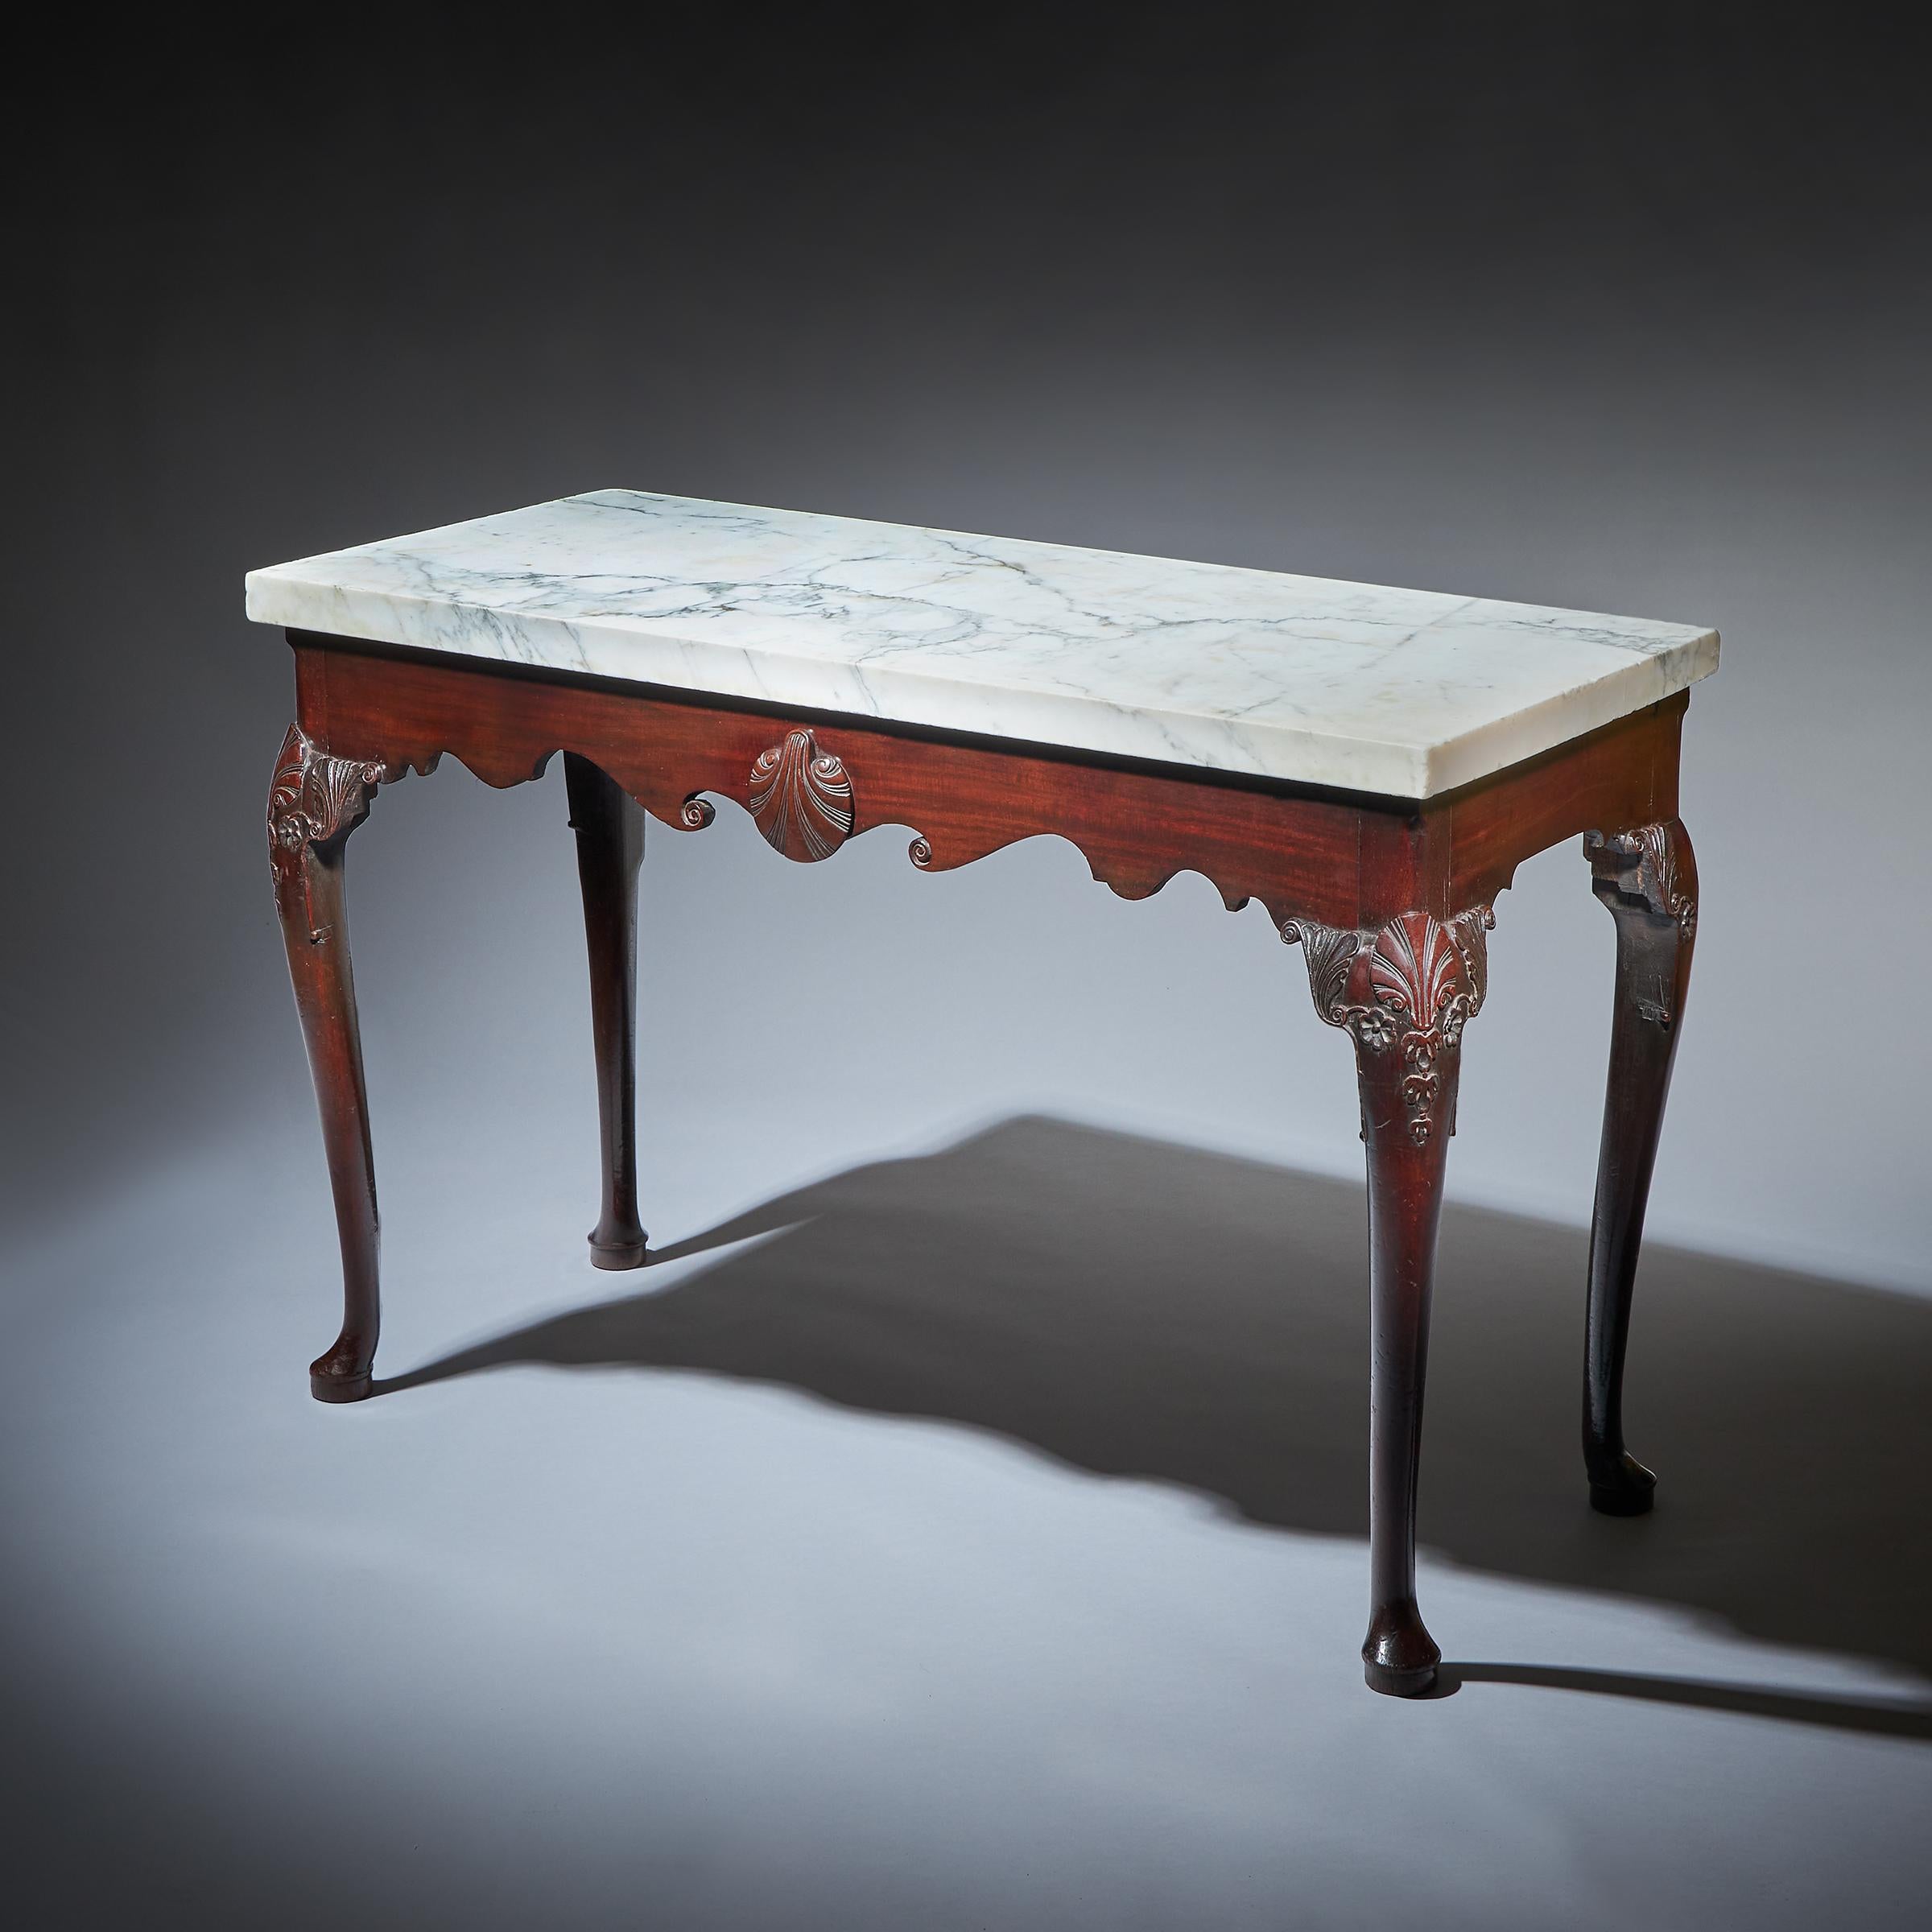 A rare early George I mahogany Irish console table with the original thick-cut statuary marble top over a shaped frieze centred by a carved shell. Raised on eared cabriole legs carved to the knee with a shell, pendant and flower patera leading to